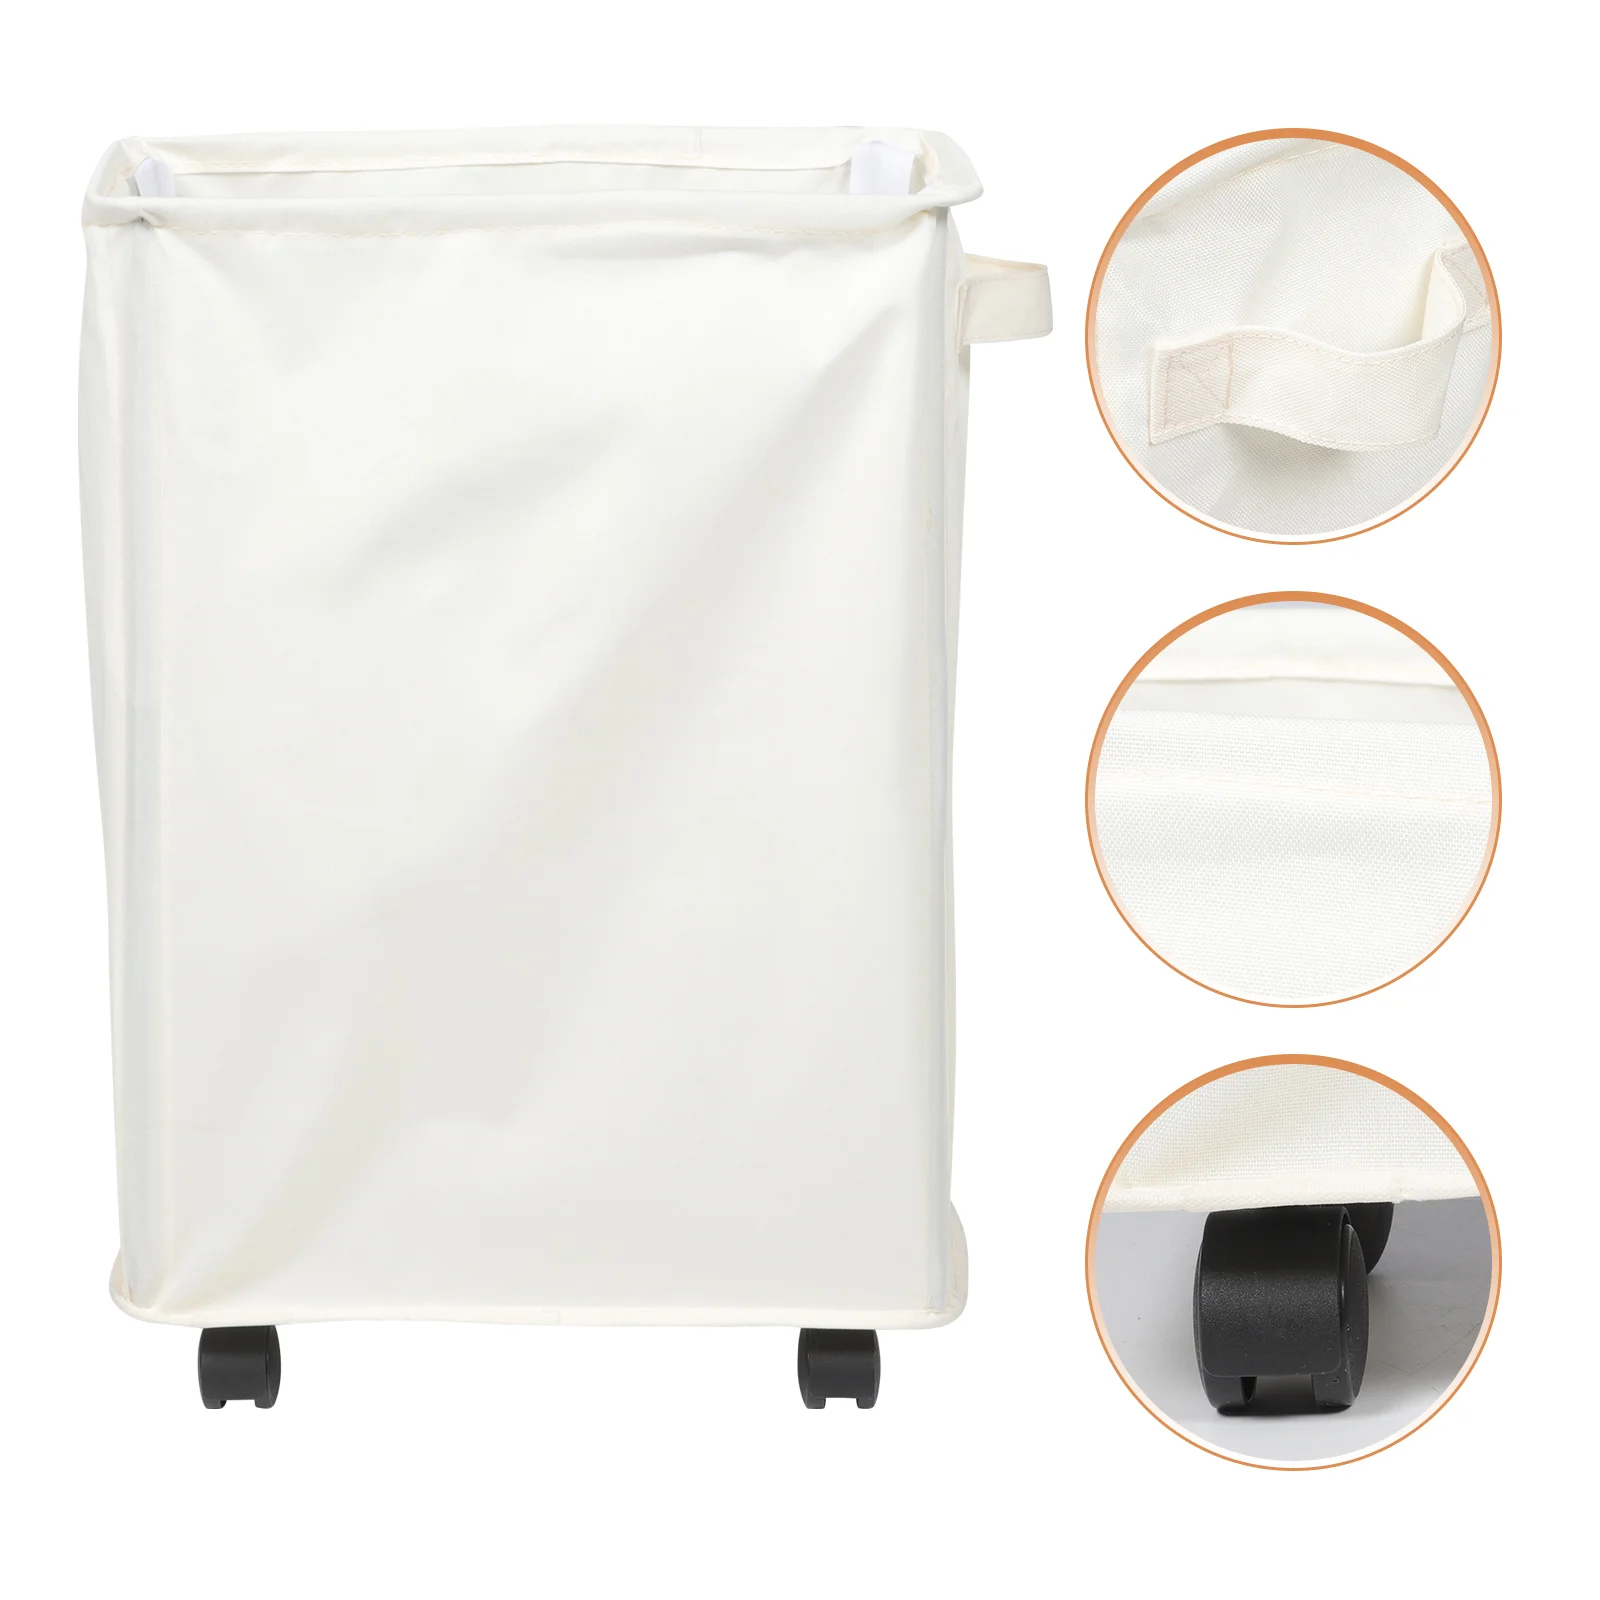 

Storage Bin Dirty Clothes Folding Laundry Basket Collapsible Bag Home Slim Rolling Handle Container Hamper Wheels Thin